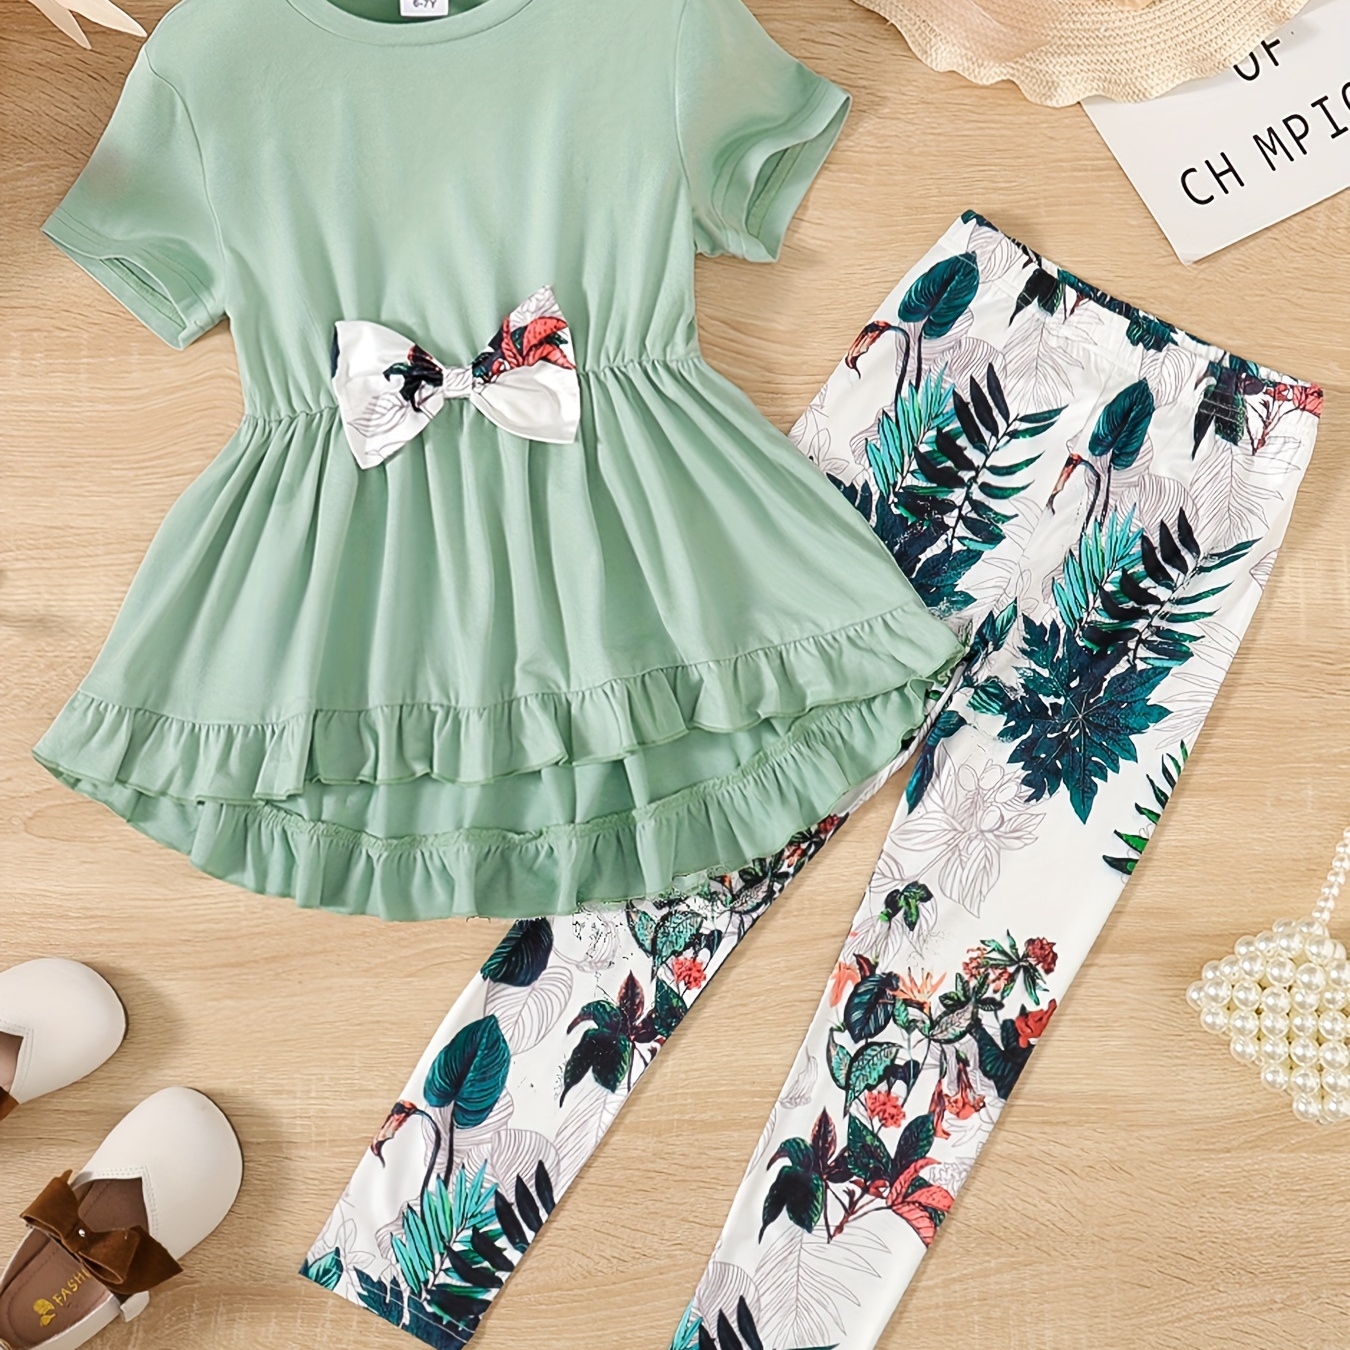 

Patpat 2pcs Kid Girl Fancy Bow Front Round Neck Ruffle Hem Short-sleeve Peplum Top And Floral Print Leggings Pants Set For Spring & Autumn/fall